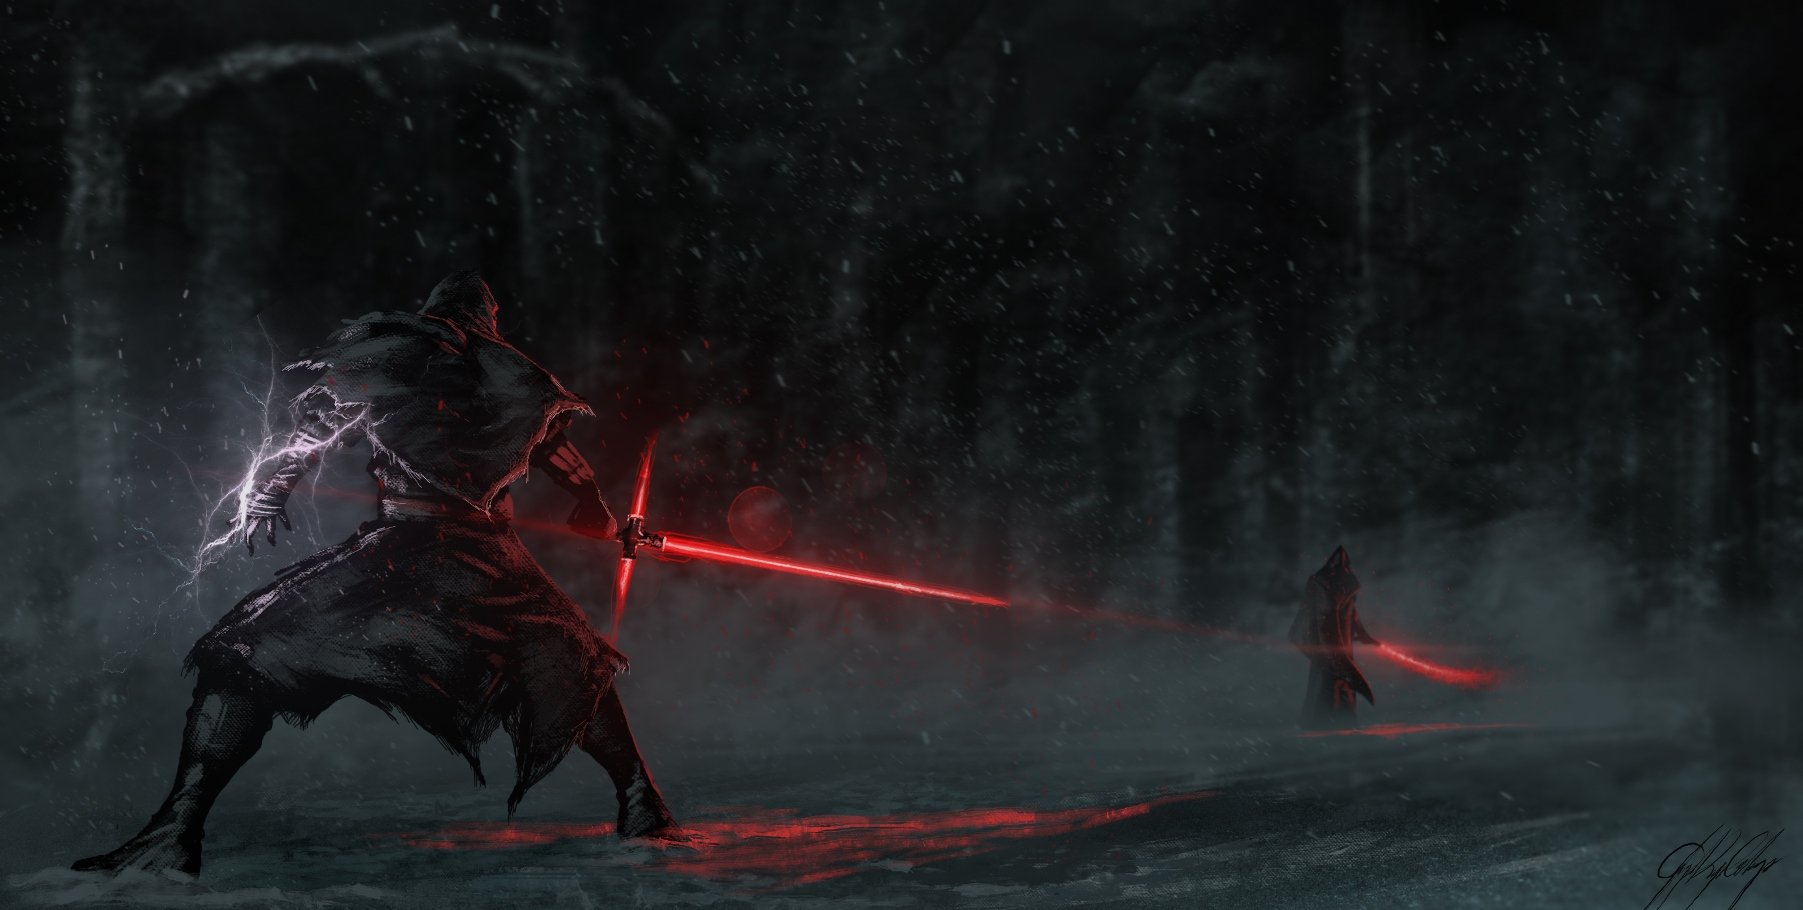 There’s Already Amazing Star Wars: Episode VII Fan Art